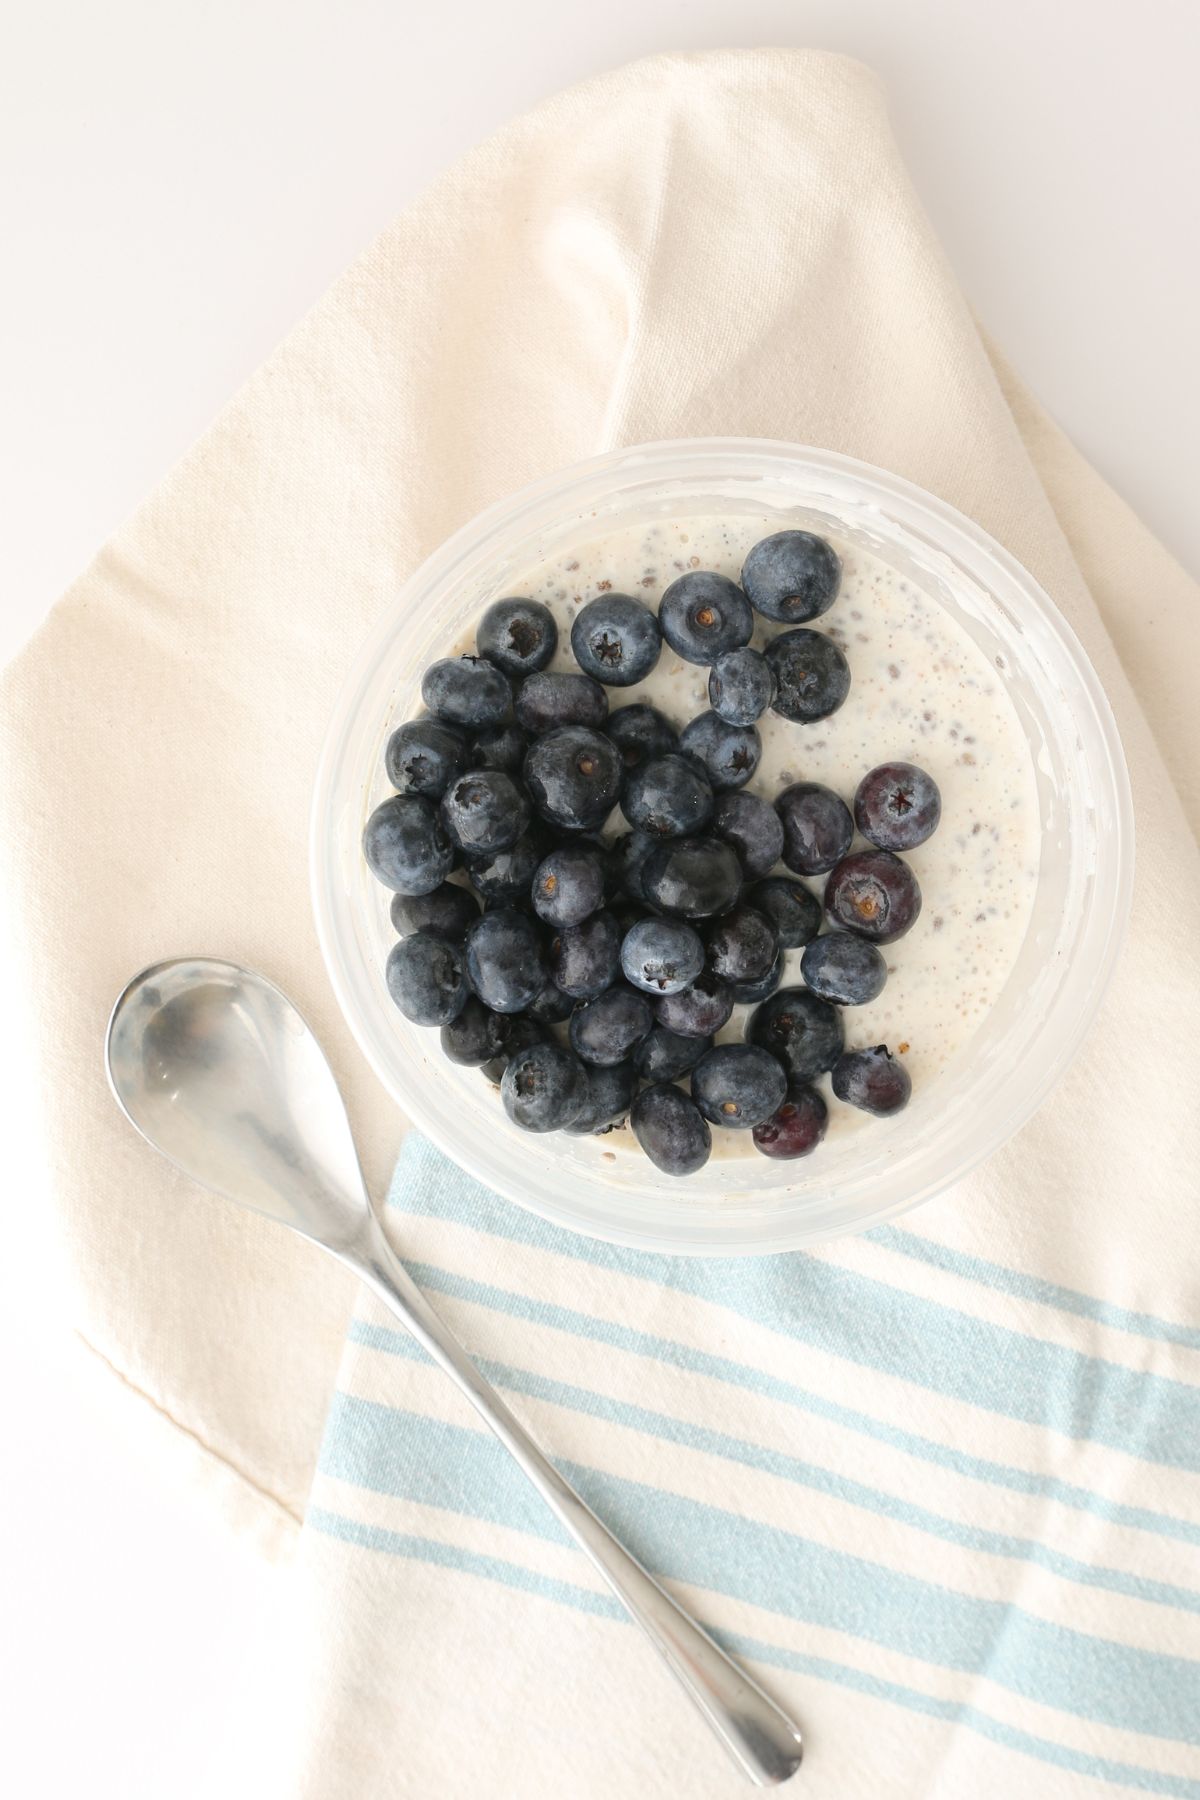 overnight protein oats in clear container topped with blueberries, with a tea towel and spoon.